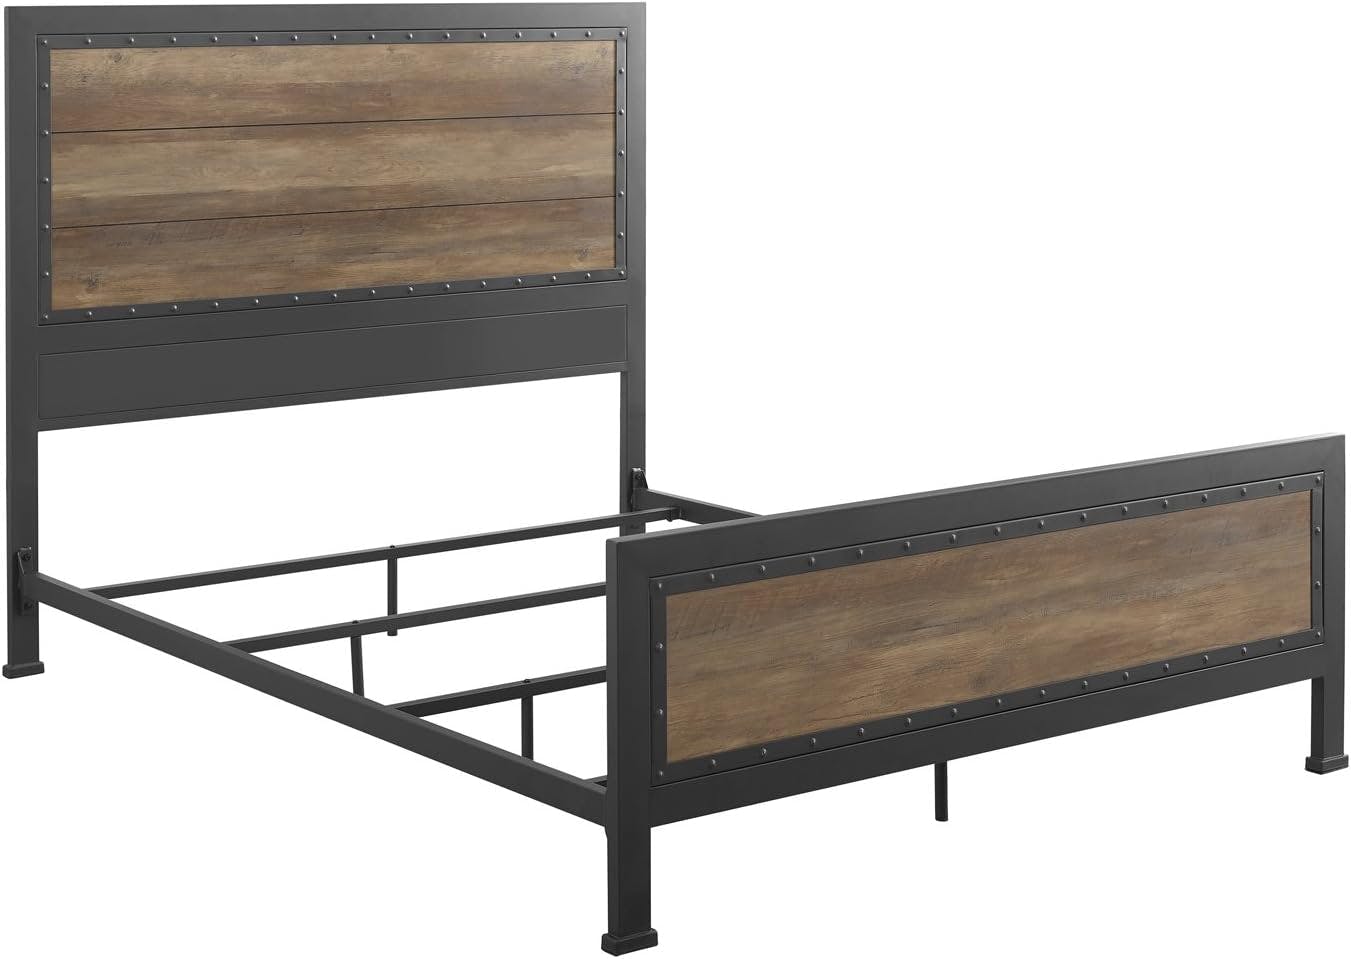 Rustic Oak Queen Bed with Metal Frame and Wood Headboard